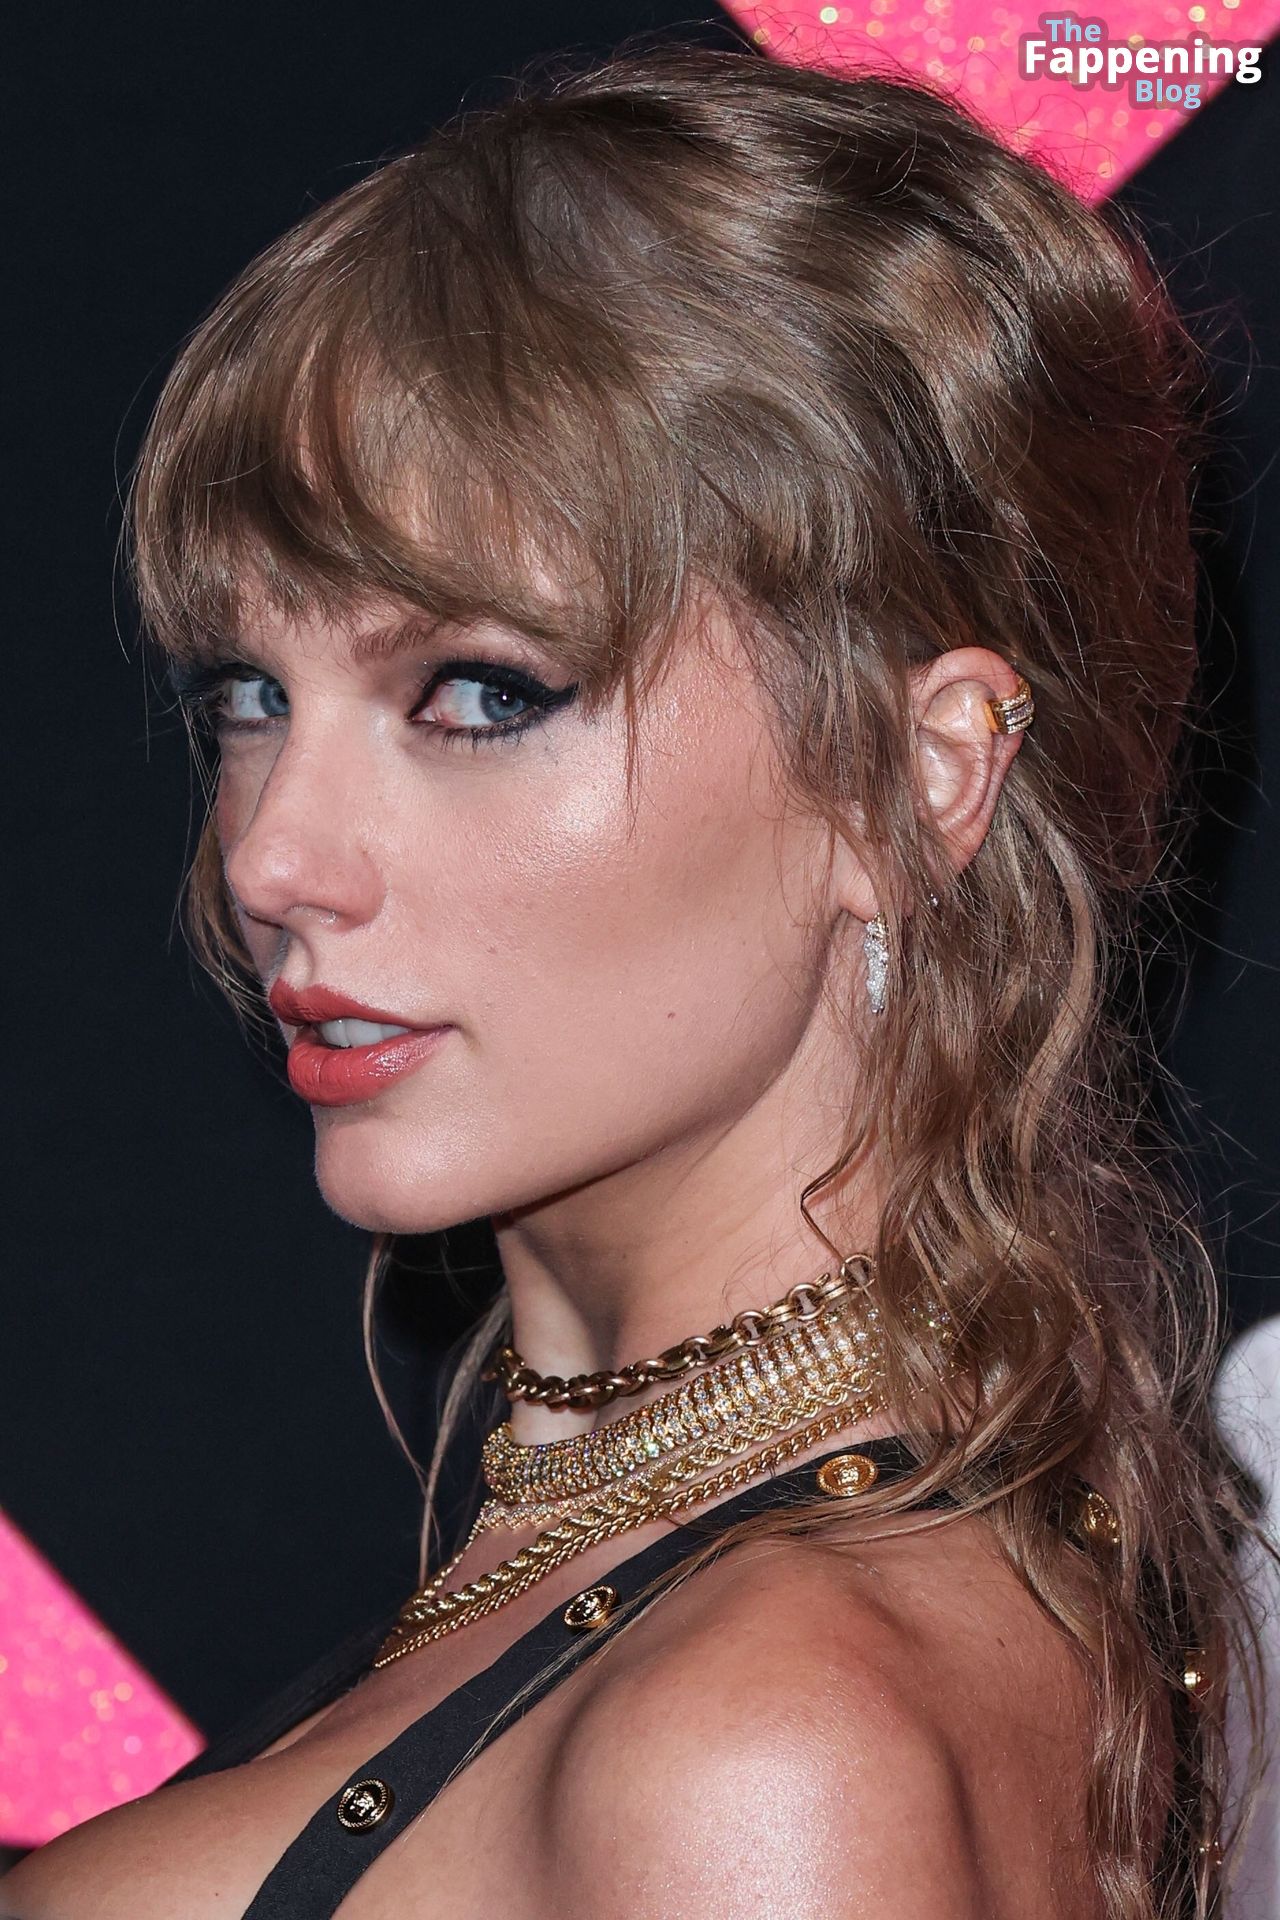 Taylor-Swift-Sexy-45-The-Fappening-Blog.jpg